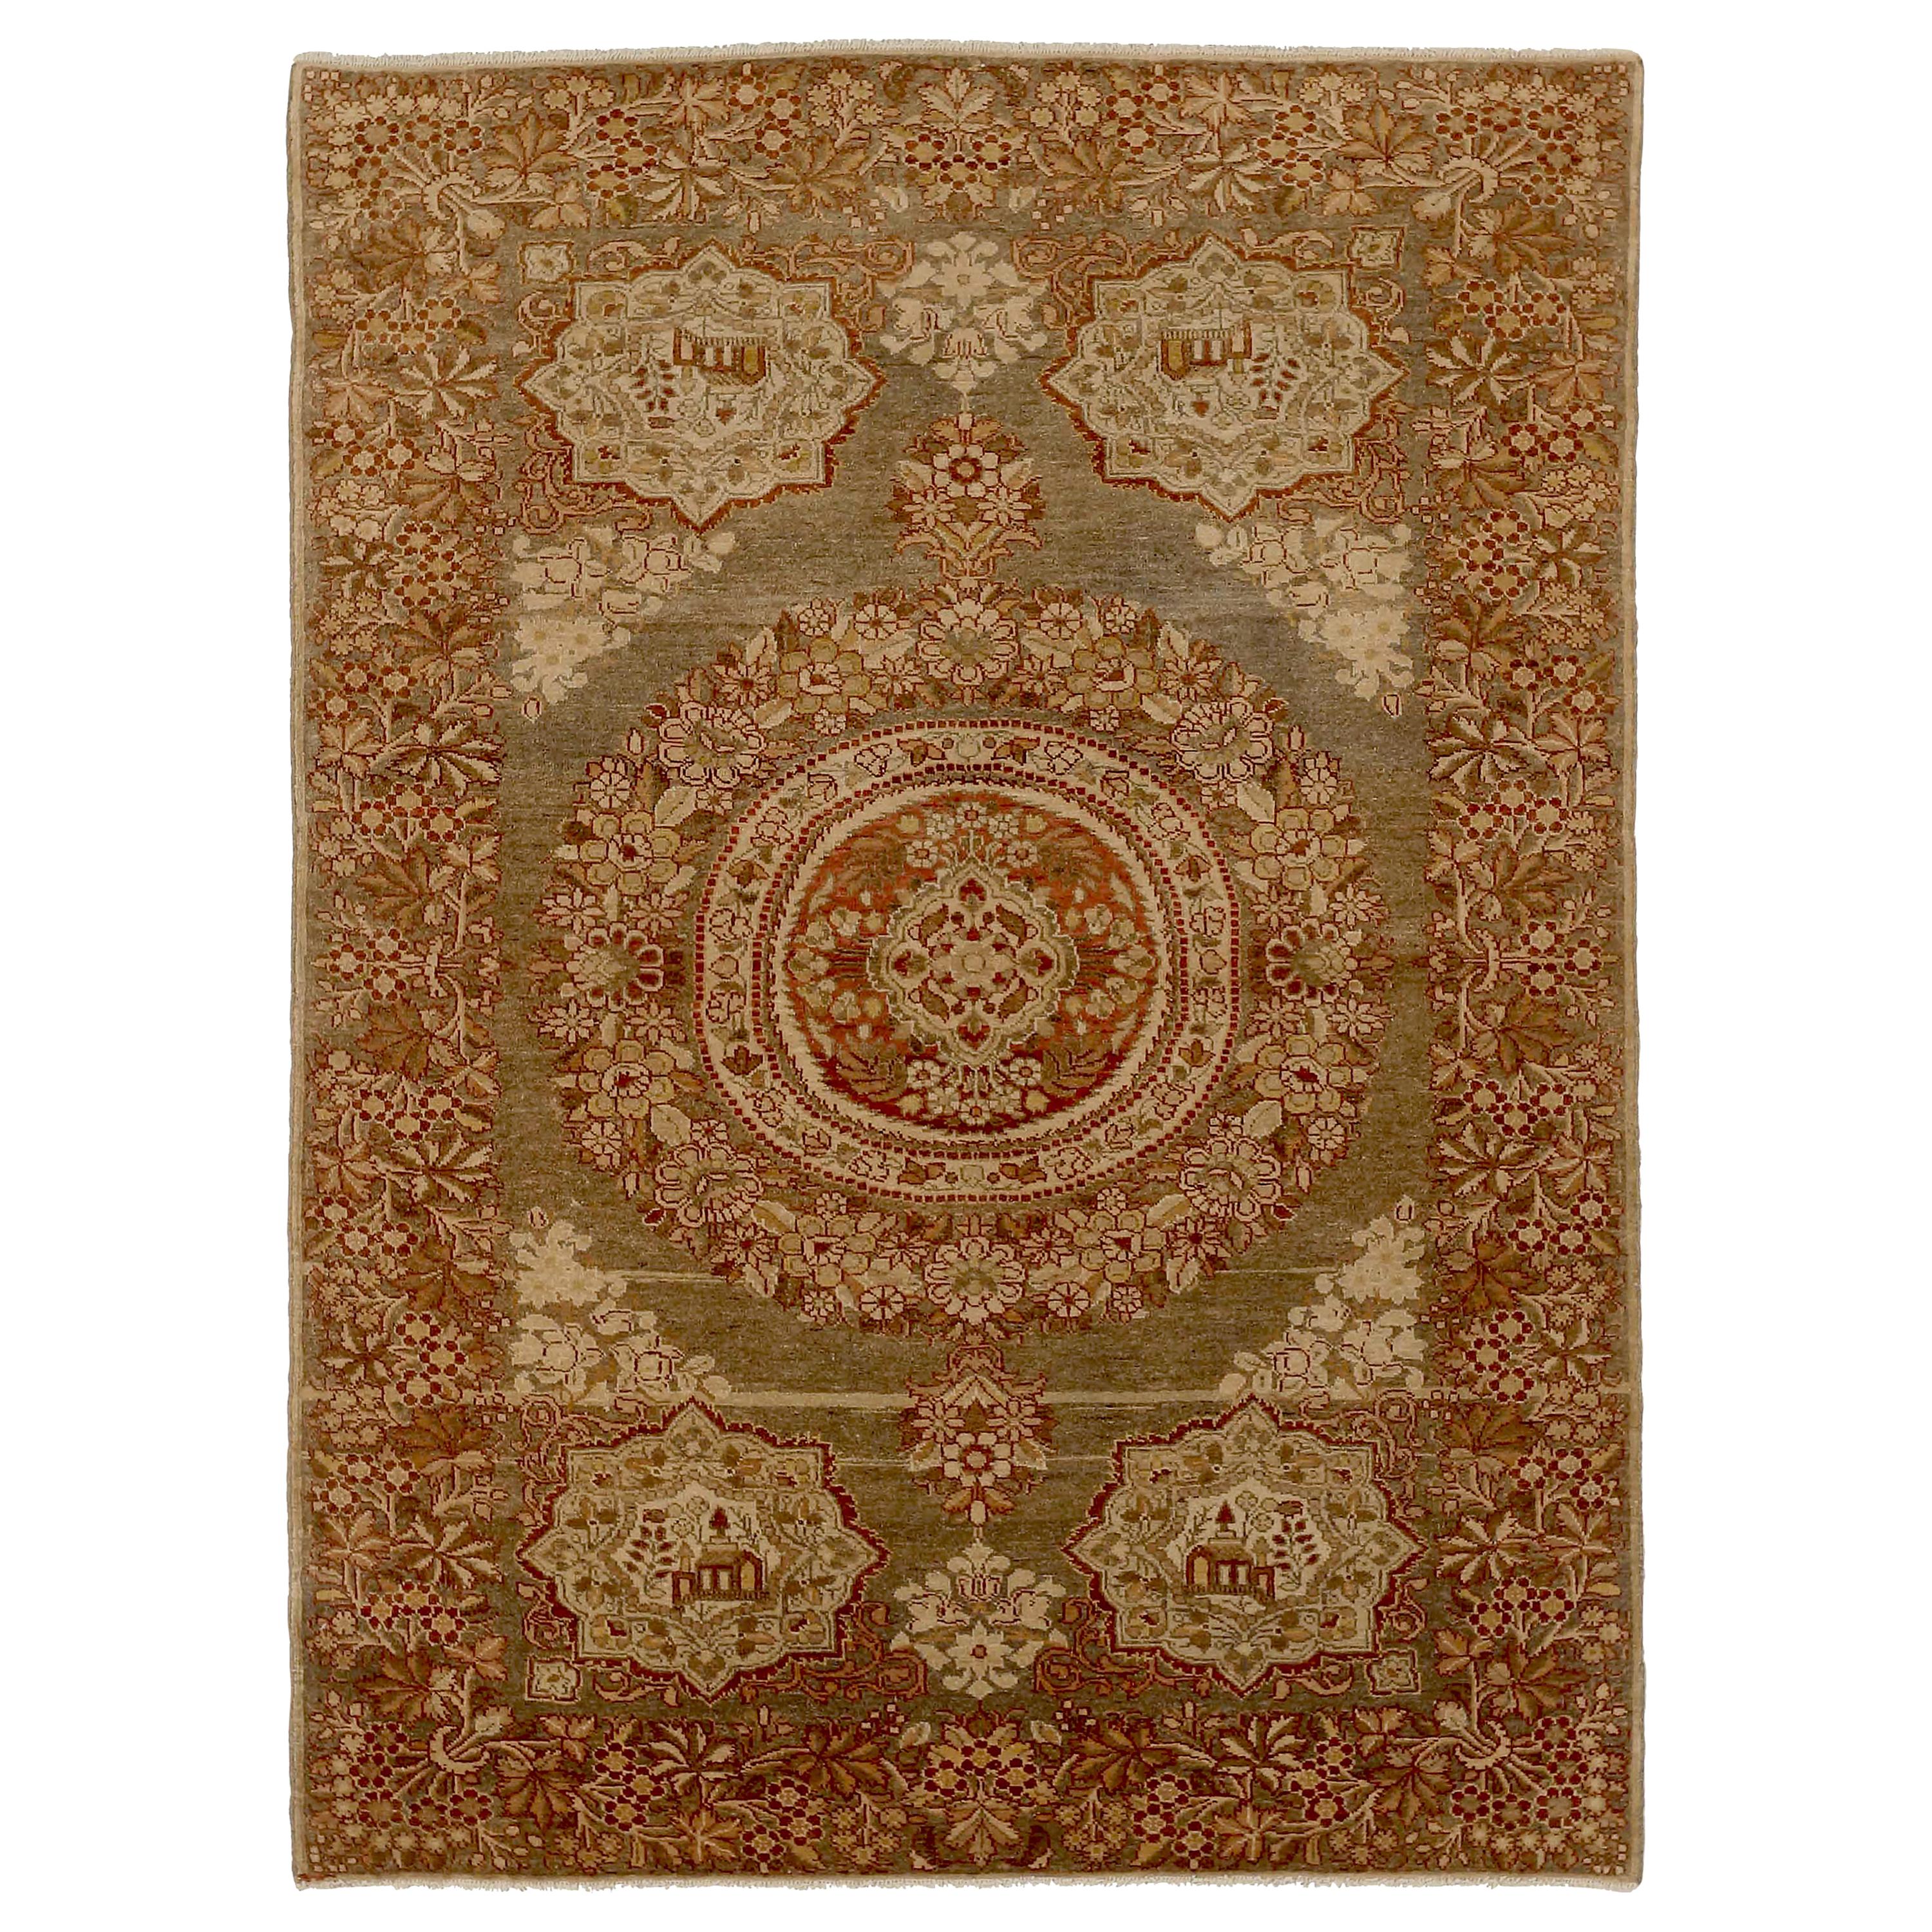 Antique Persian Malayer Rug with Brown and Beige Floral Patterns on Ivory Field